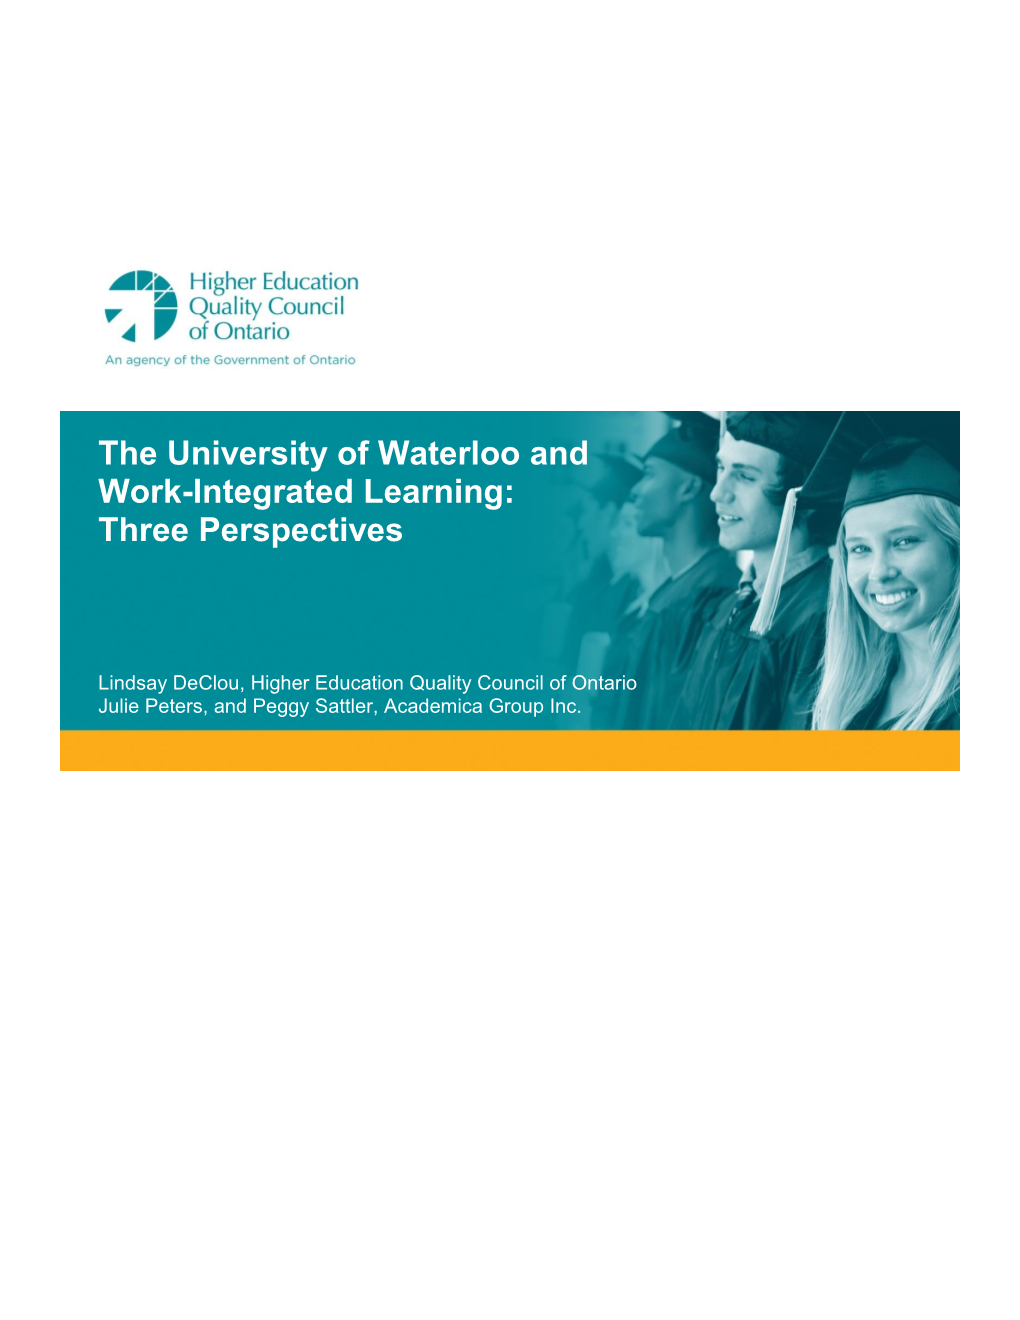 The University of Waterloo and Work-Integrated Learning: Three Perspectives